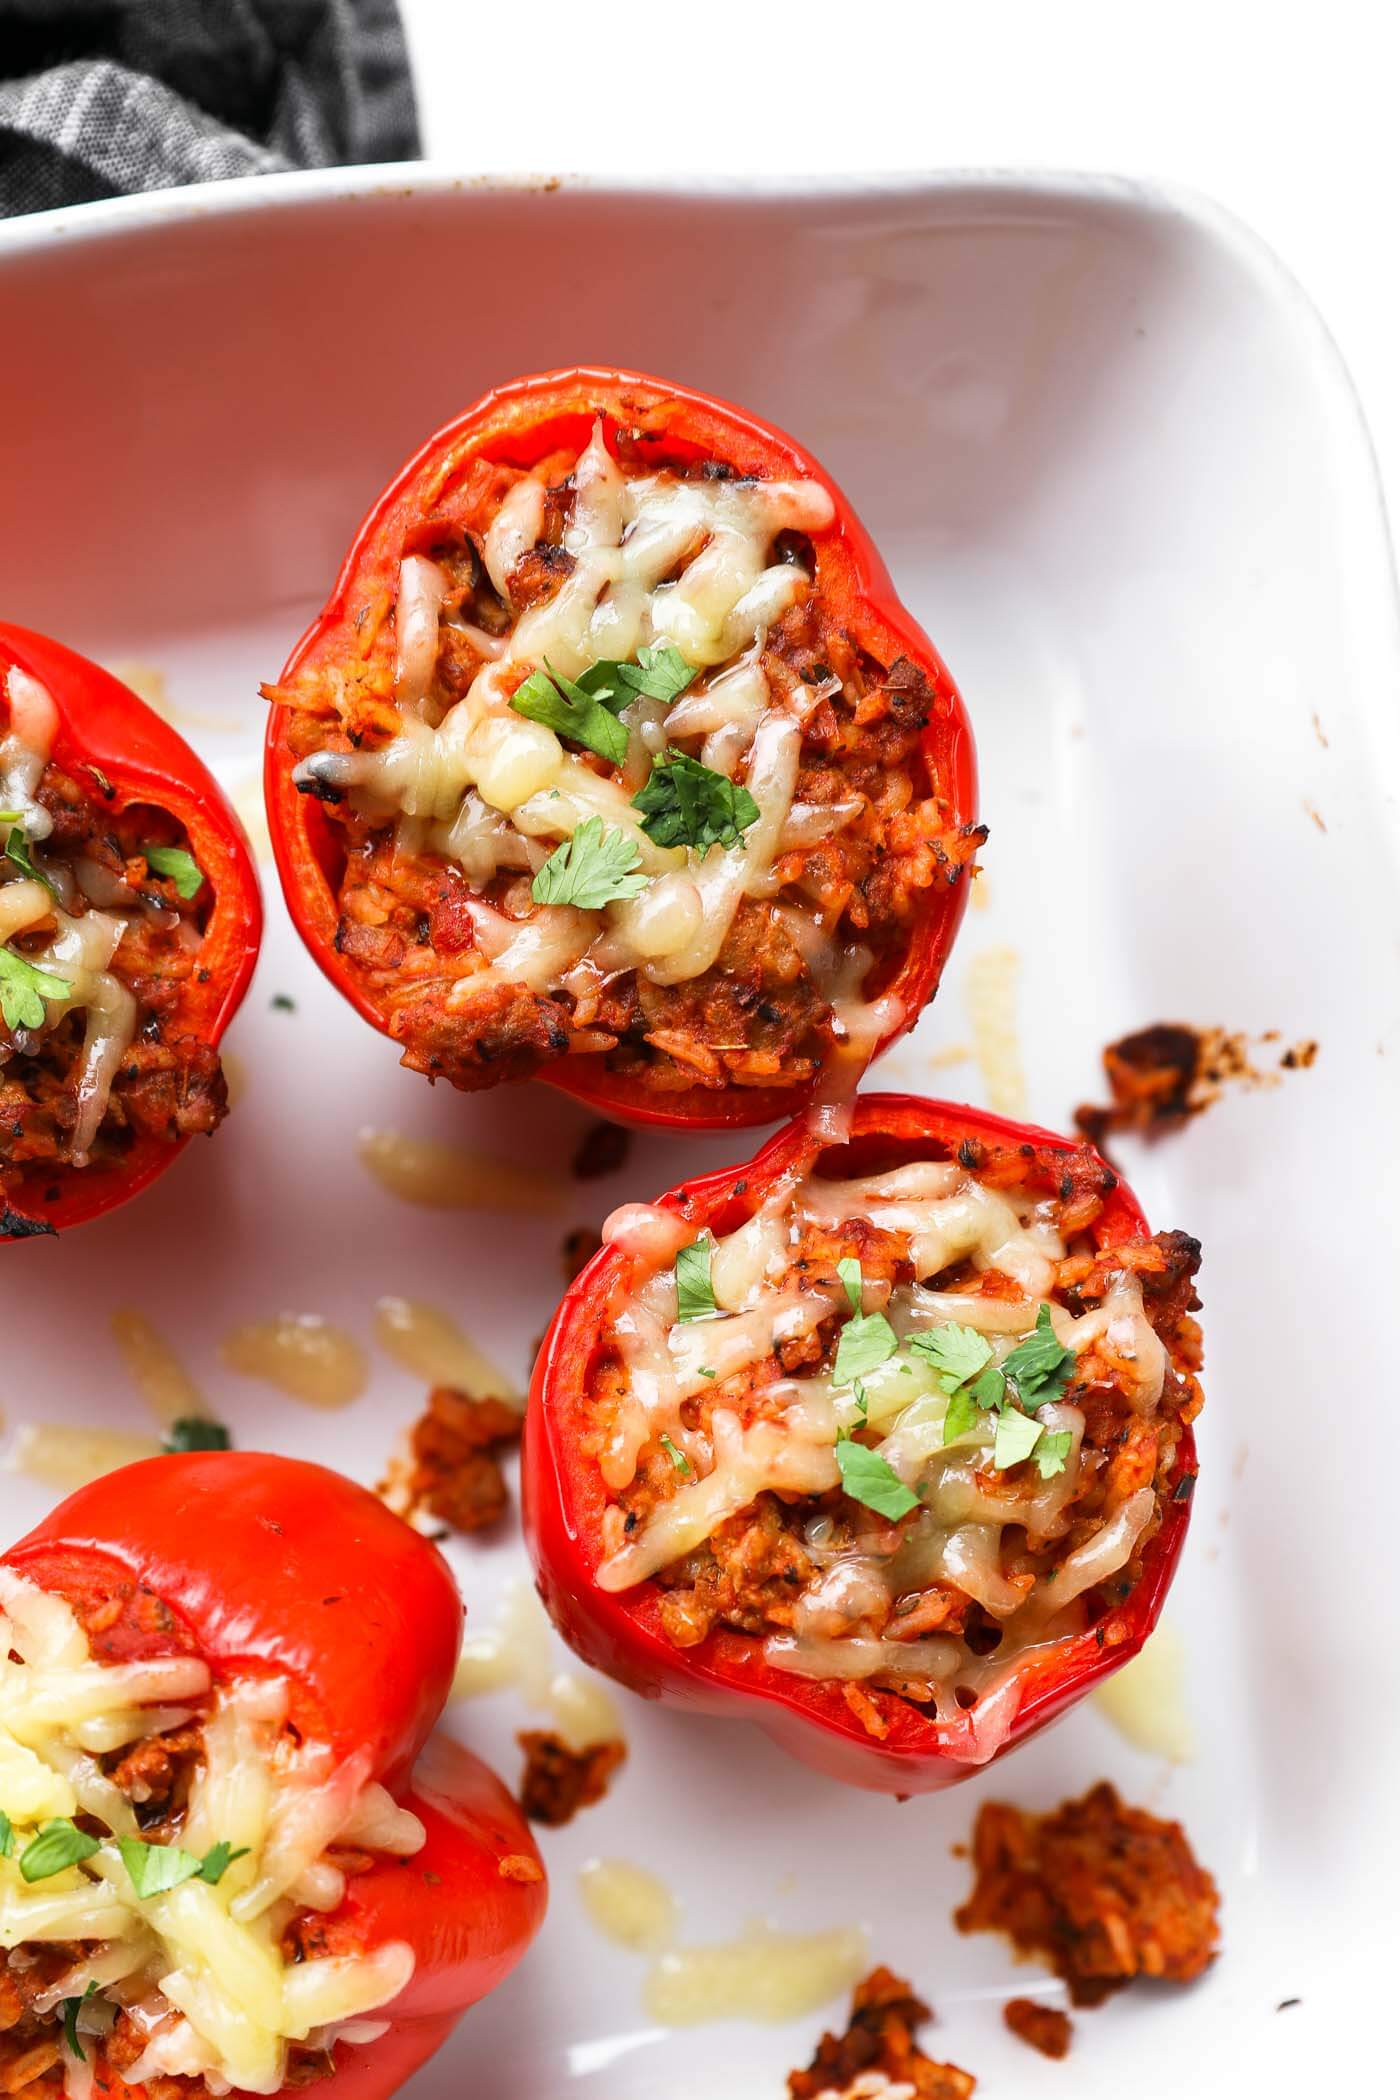 Overhead image of a baking dish with stuffed bell peppers in it. Melted cheese and chopped parsley garnish the tops.